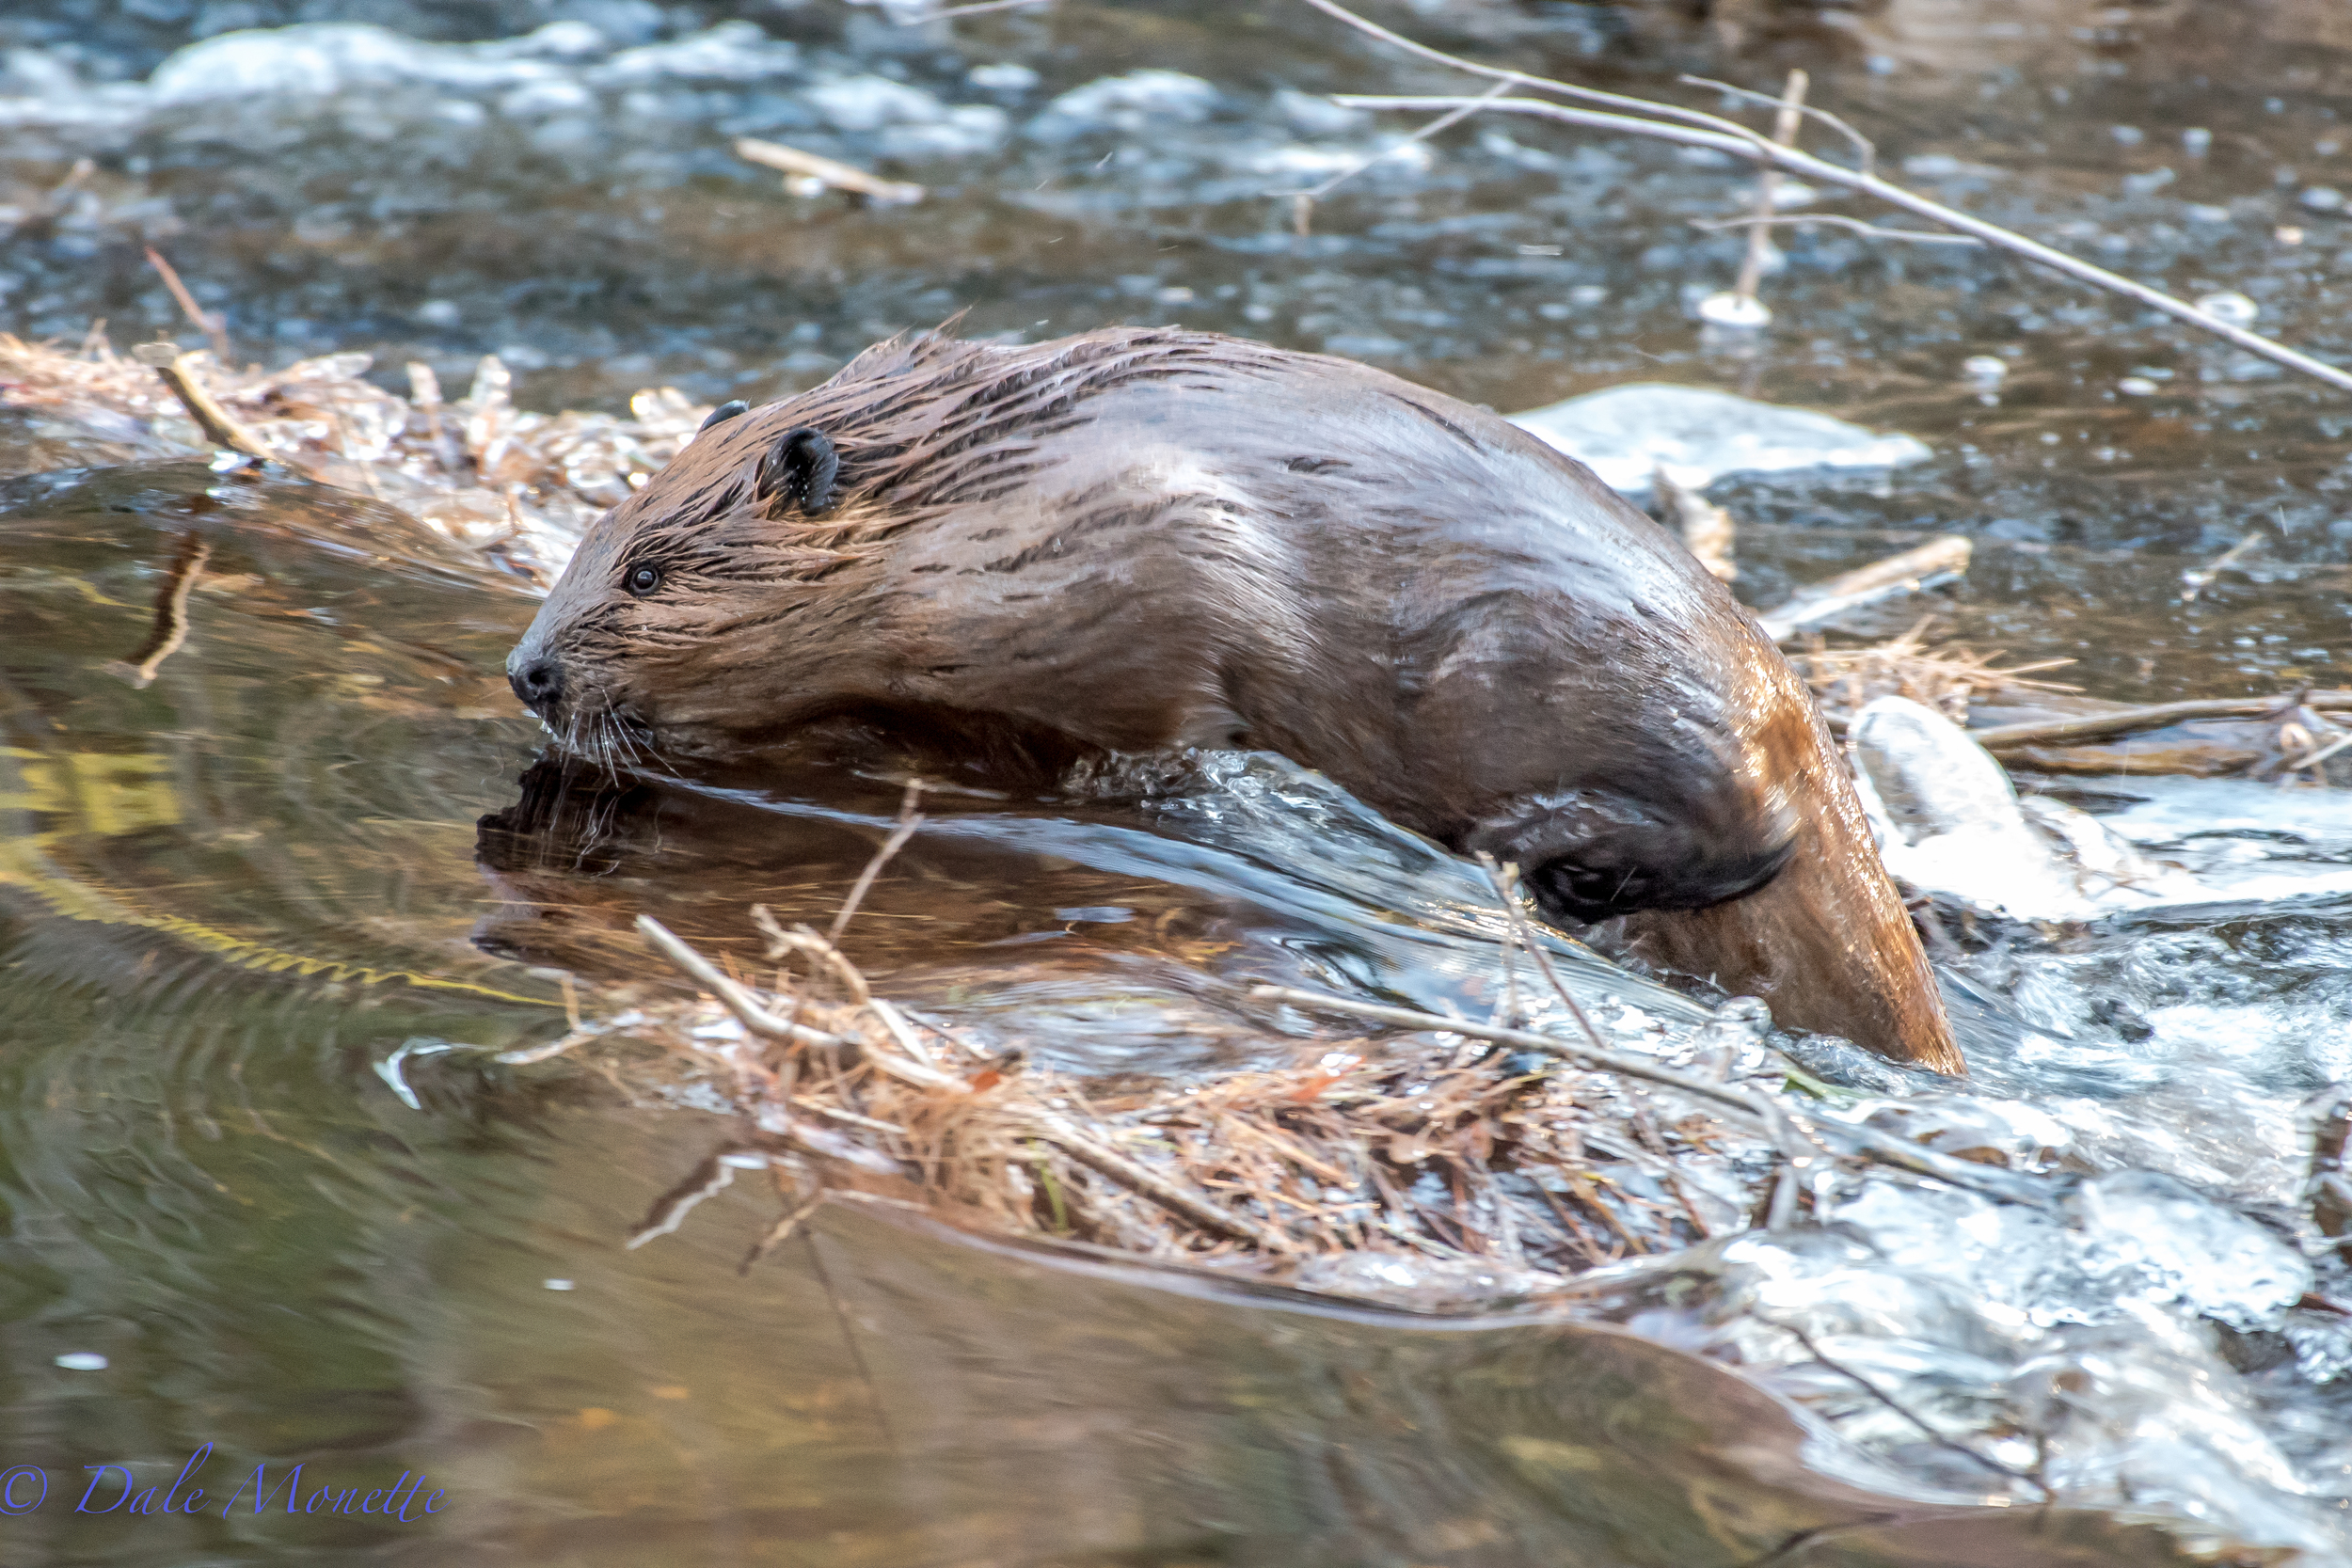   I watched 2 young beavers at Quabbin out in a fast running stream below their pond for about an hour this morning. One decided to head back home and had to swim over 3 smaller dams &nbsp;and by me to get to the main pond behind their big dam. &nbsp